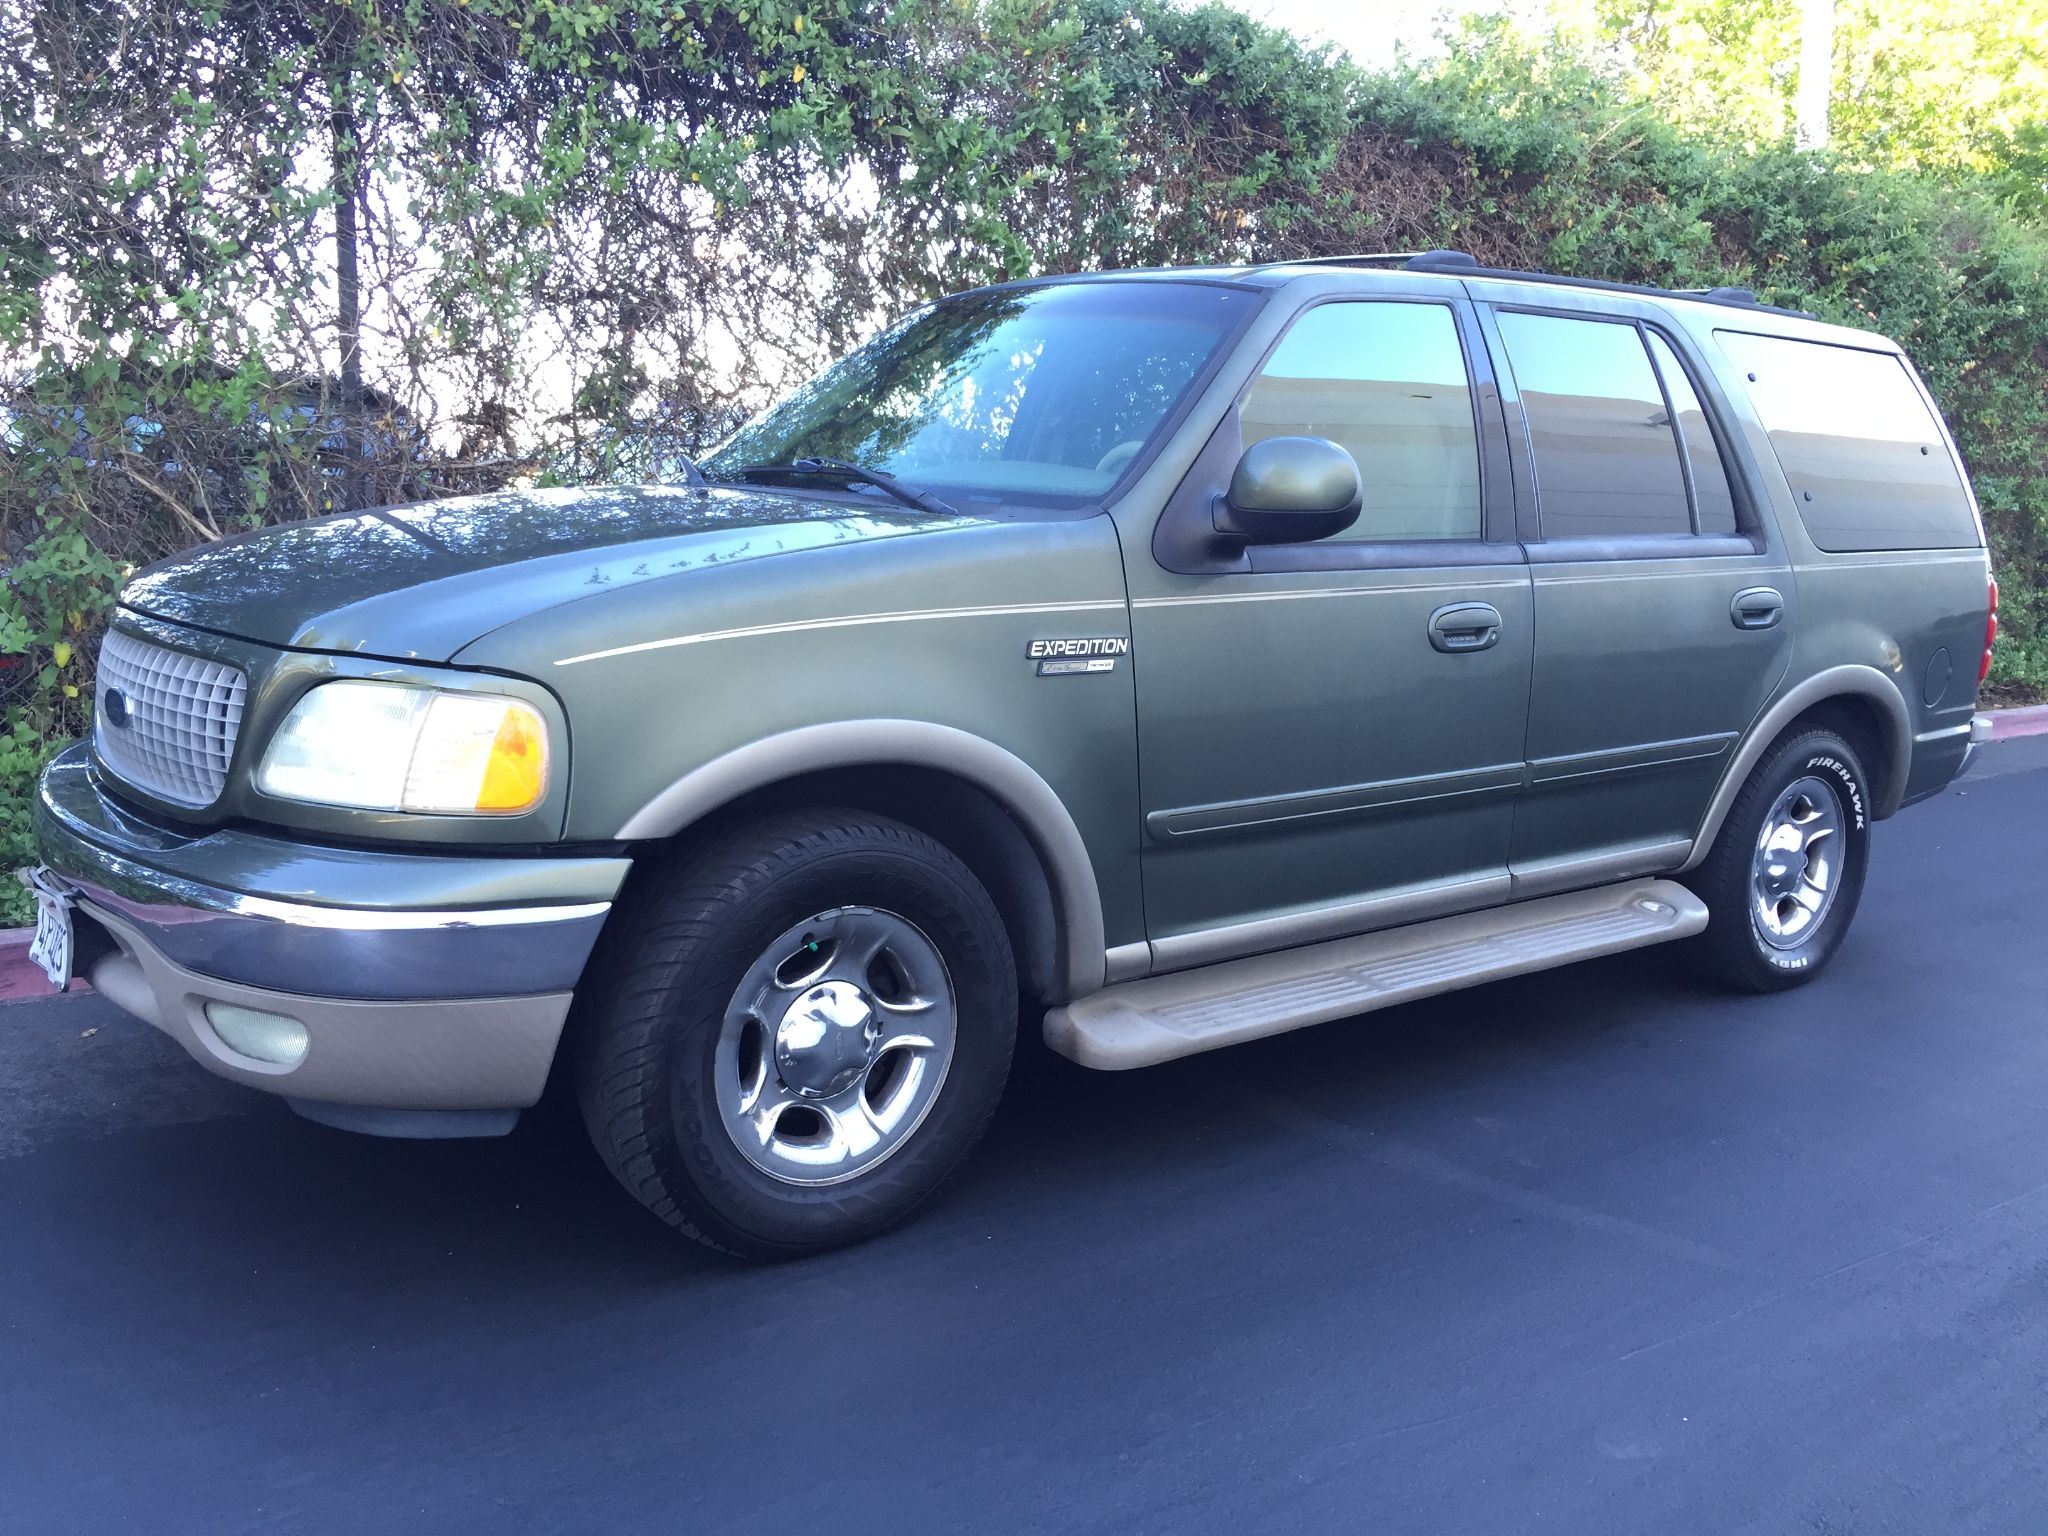 Used 2001 Ford Expedition Eddie Bauer at City Cars Warehouse Inc